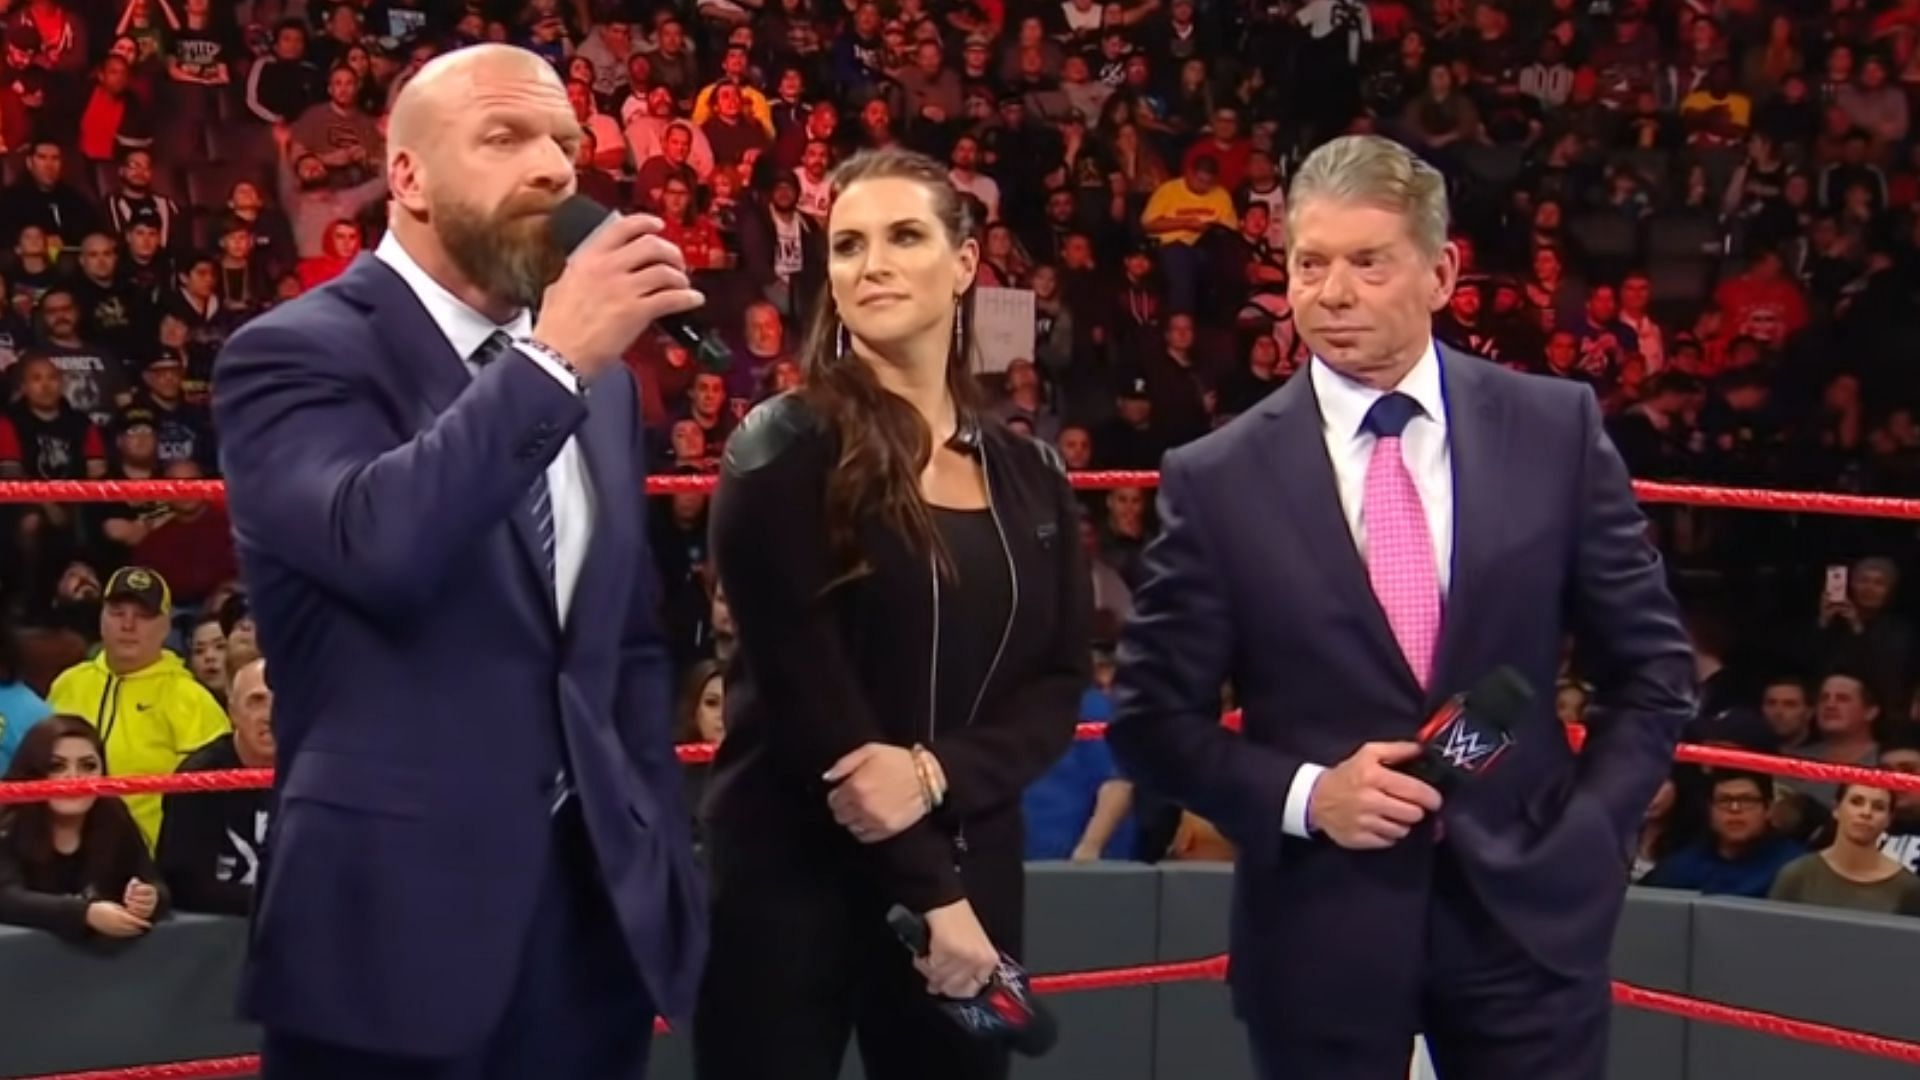 Left to right: Triple H, Stephanie McMahon, and Vince McMahon.